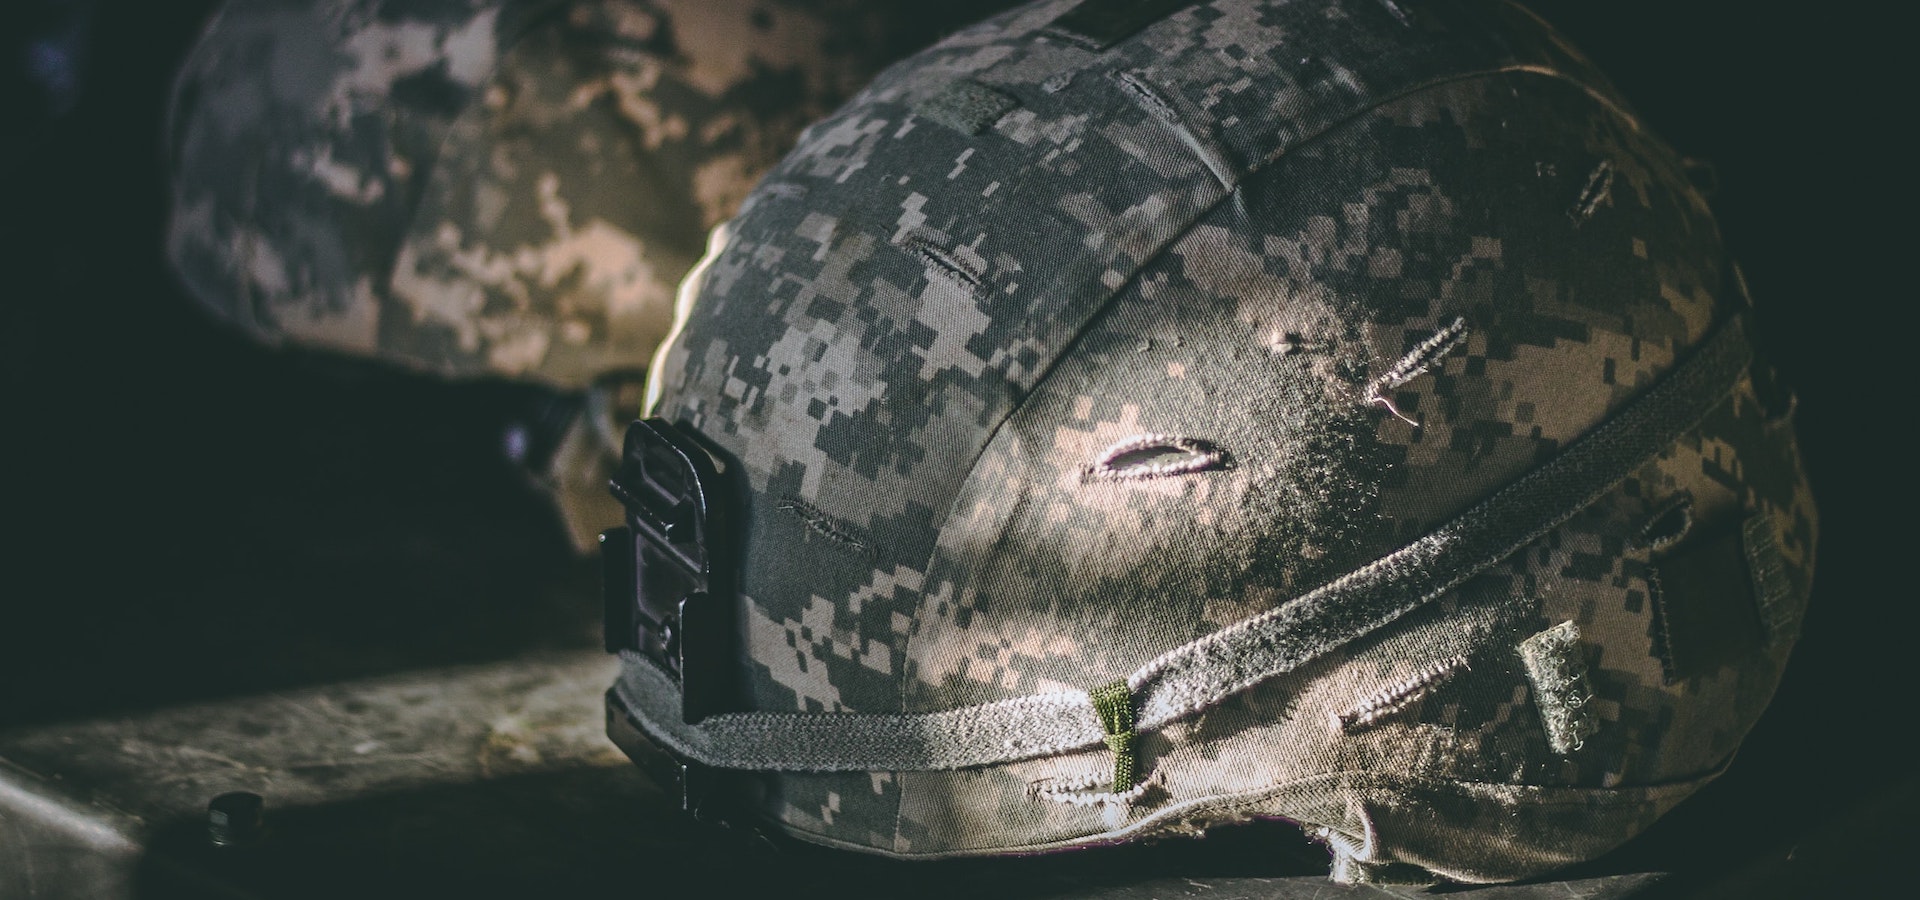 a shadowed side view of a camouflage soldier defence helmet